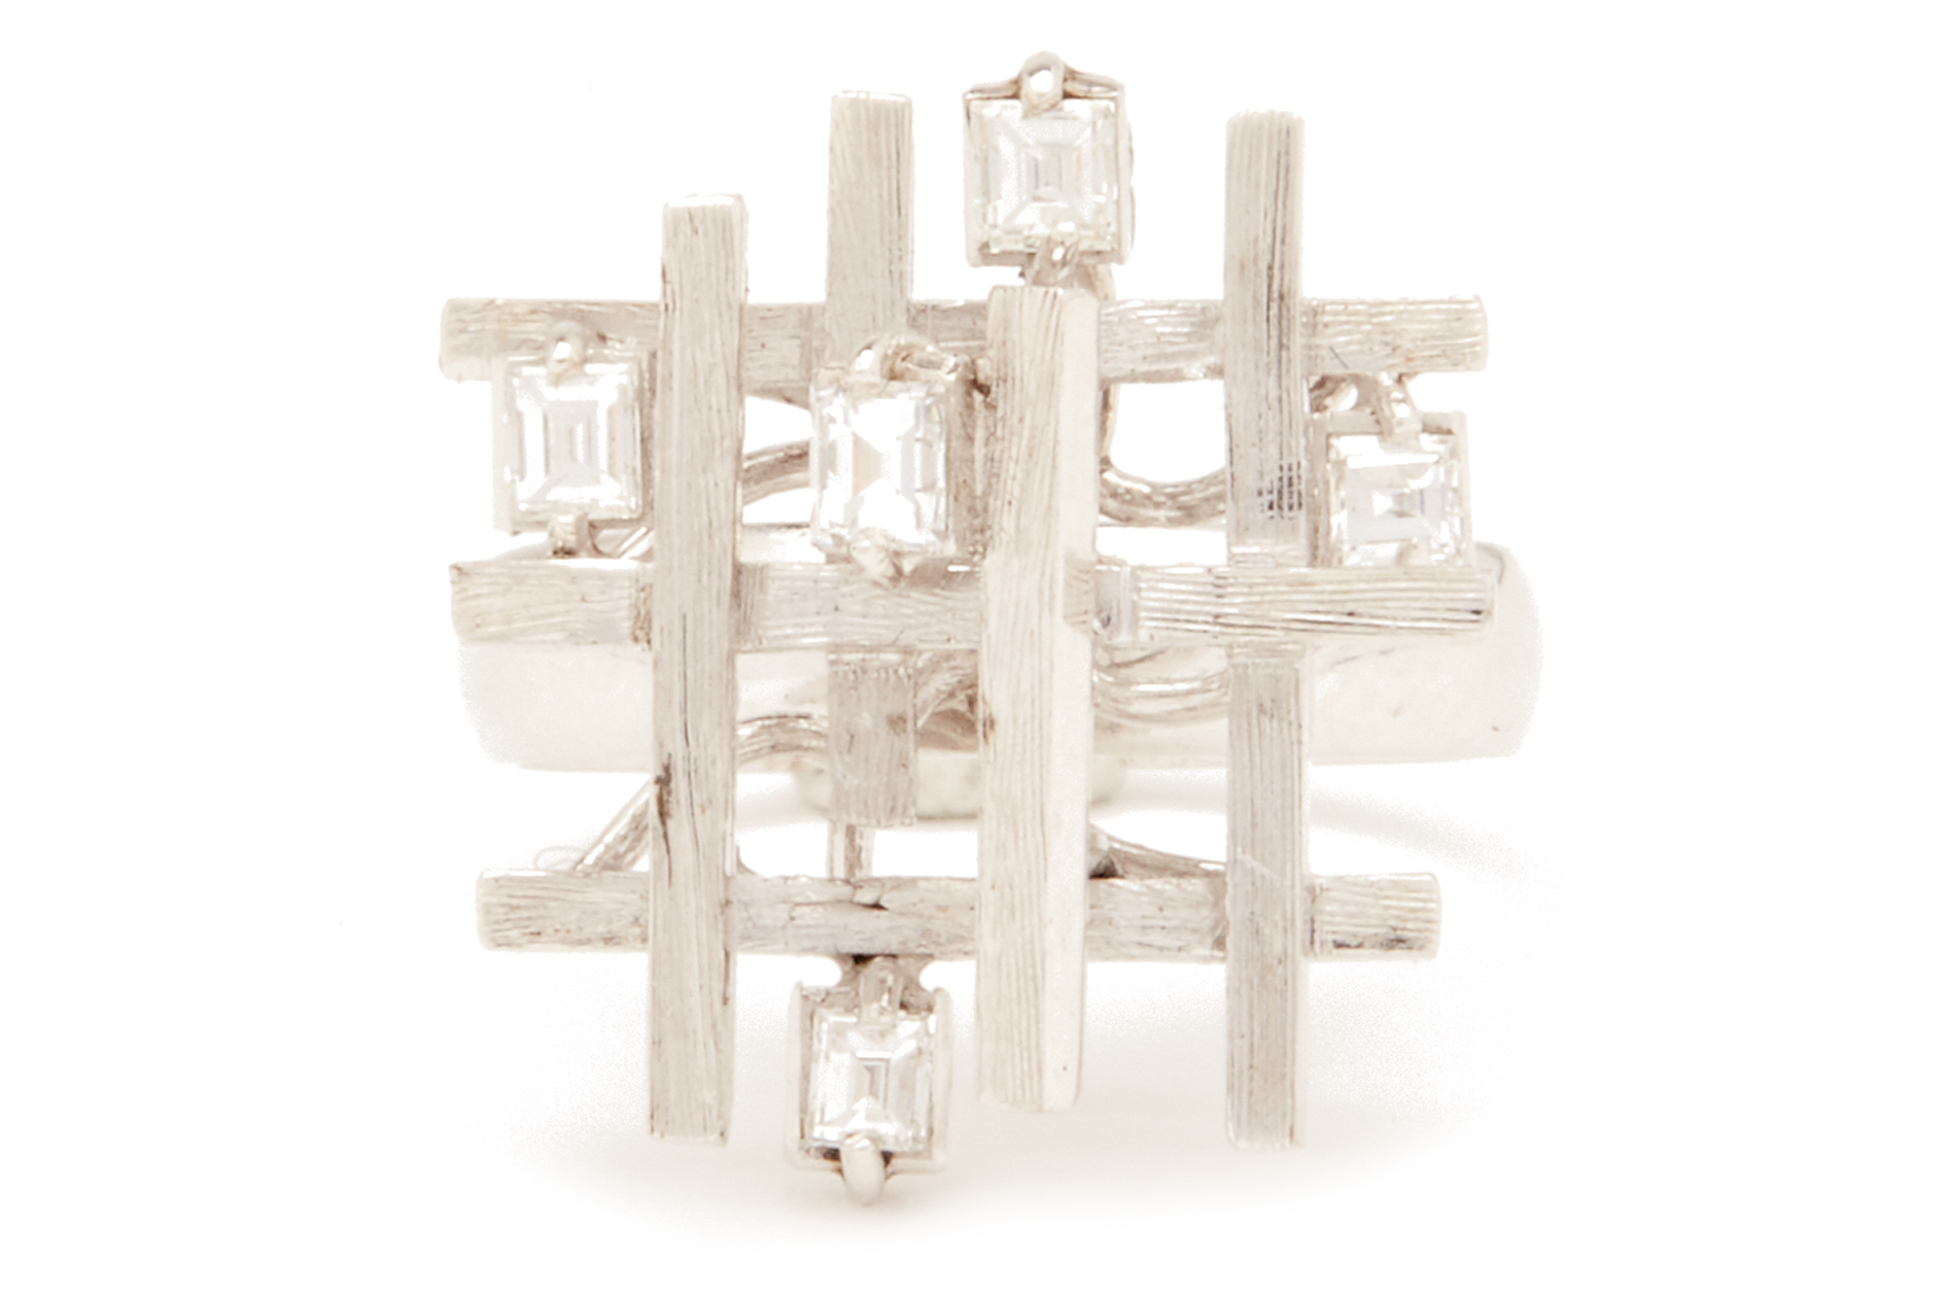 A GEOMETRIC SCULPTURAL DIAMOND RING - Image 3 of 3